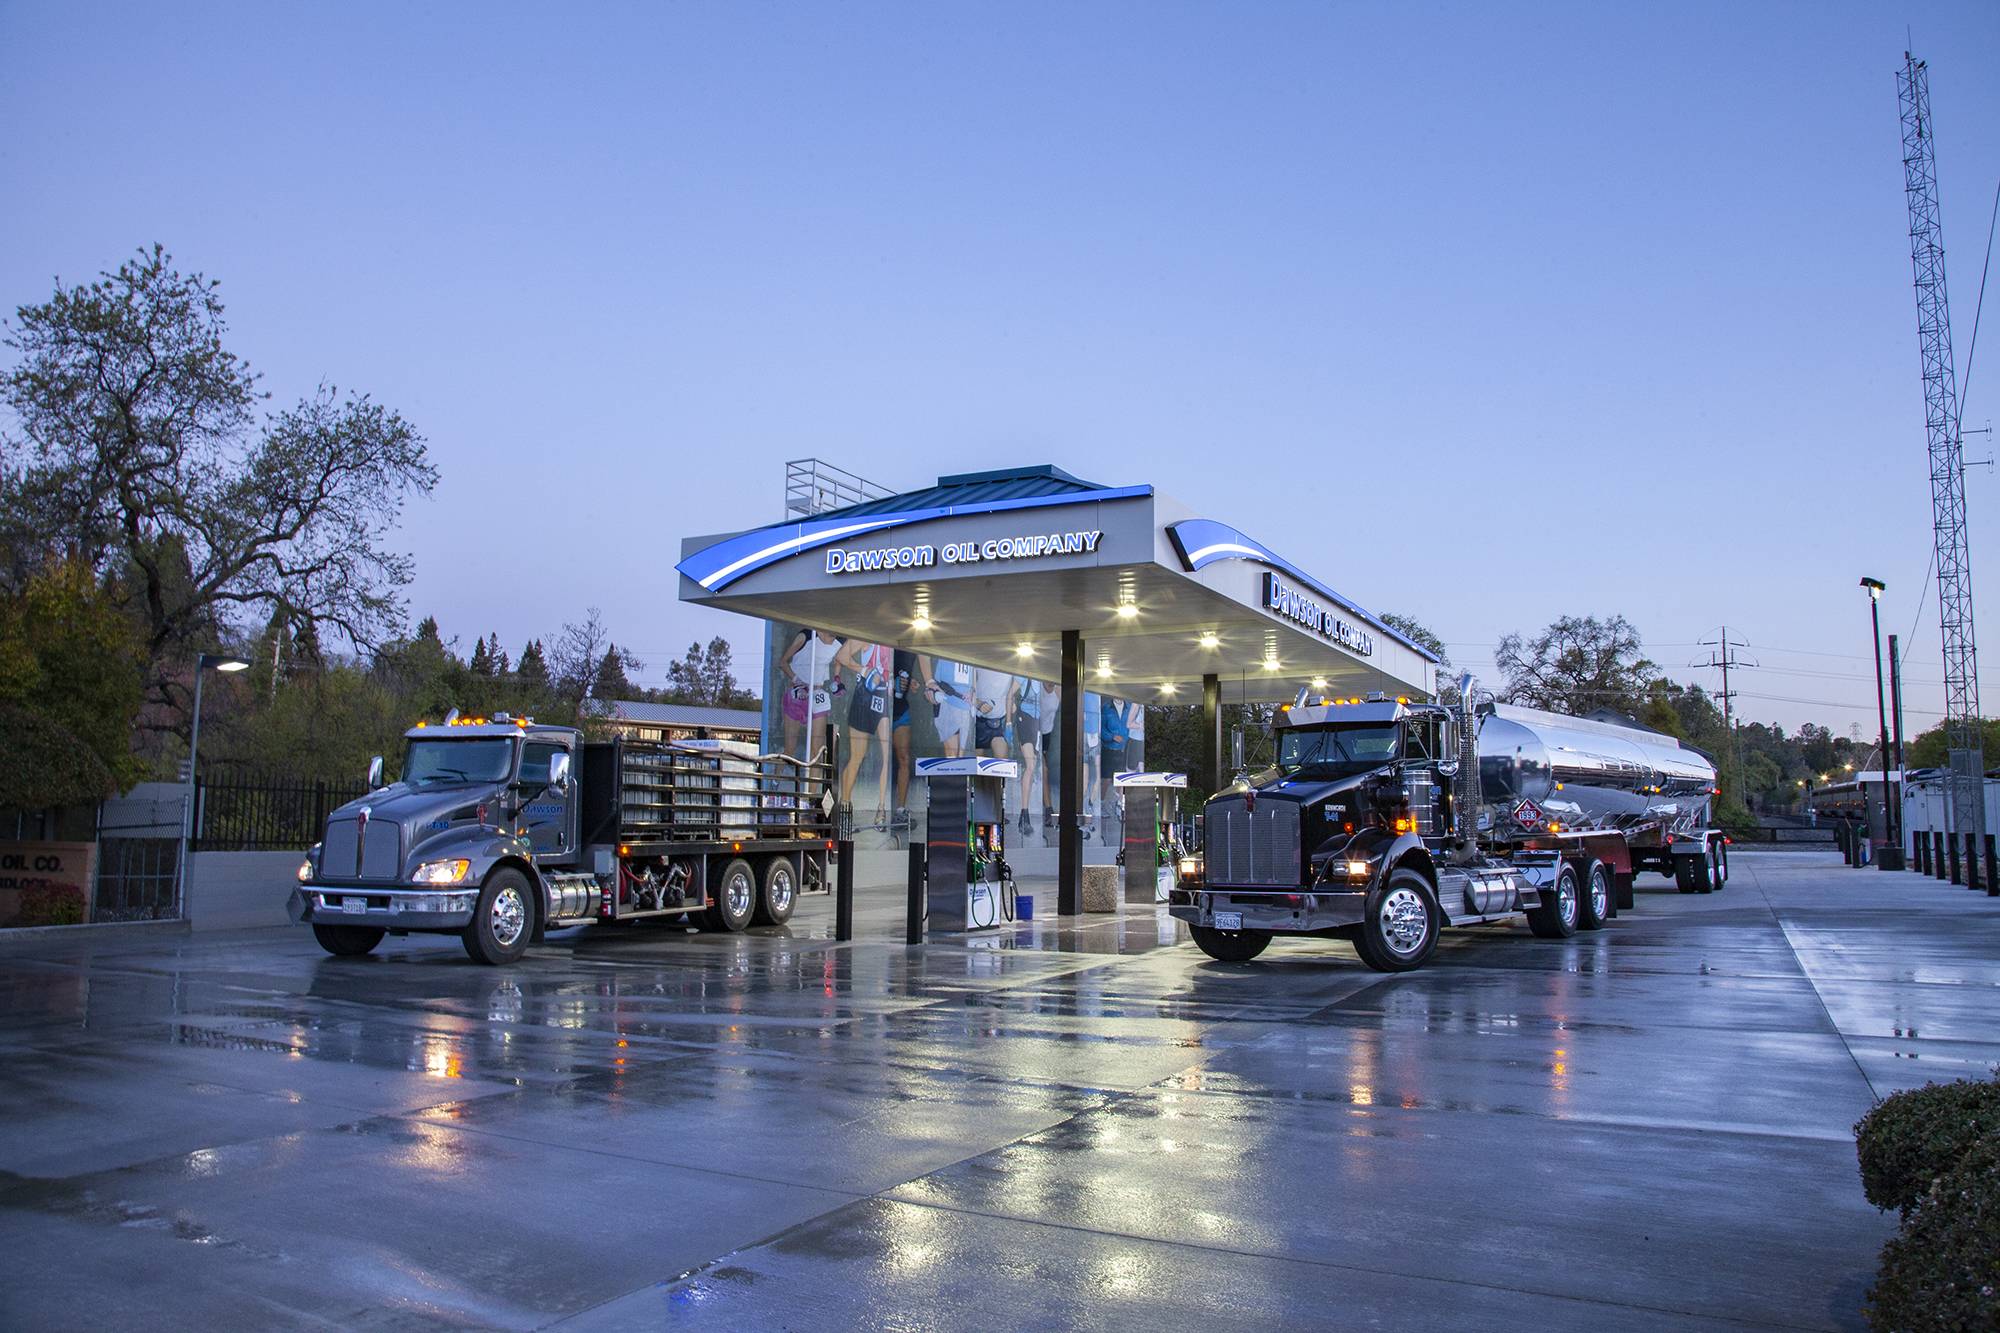 We are Northern California's provider of bulk fuel and lubricants, providing safe, clean fueling stations and unparalleled customer service.